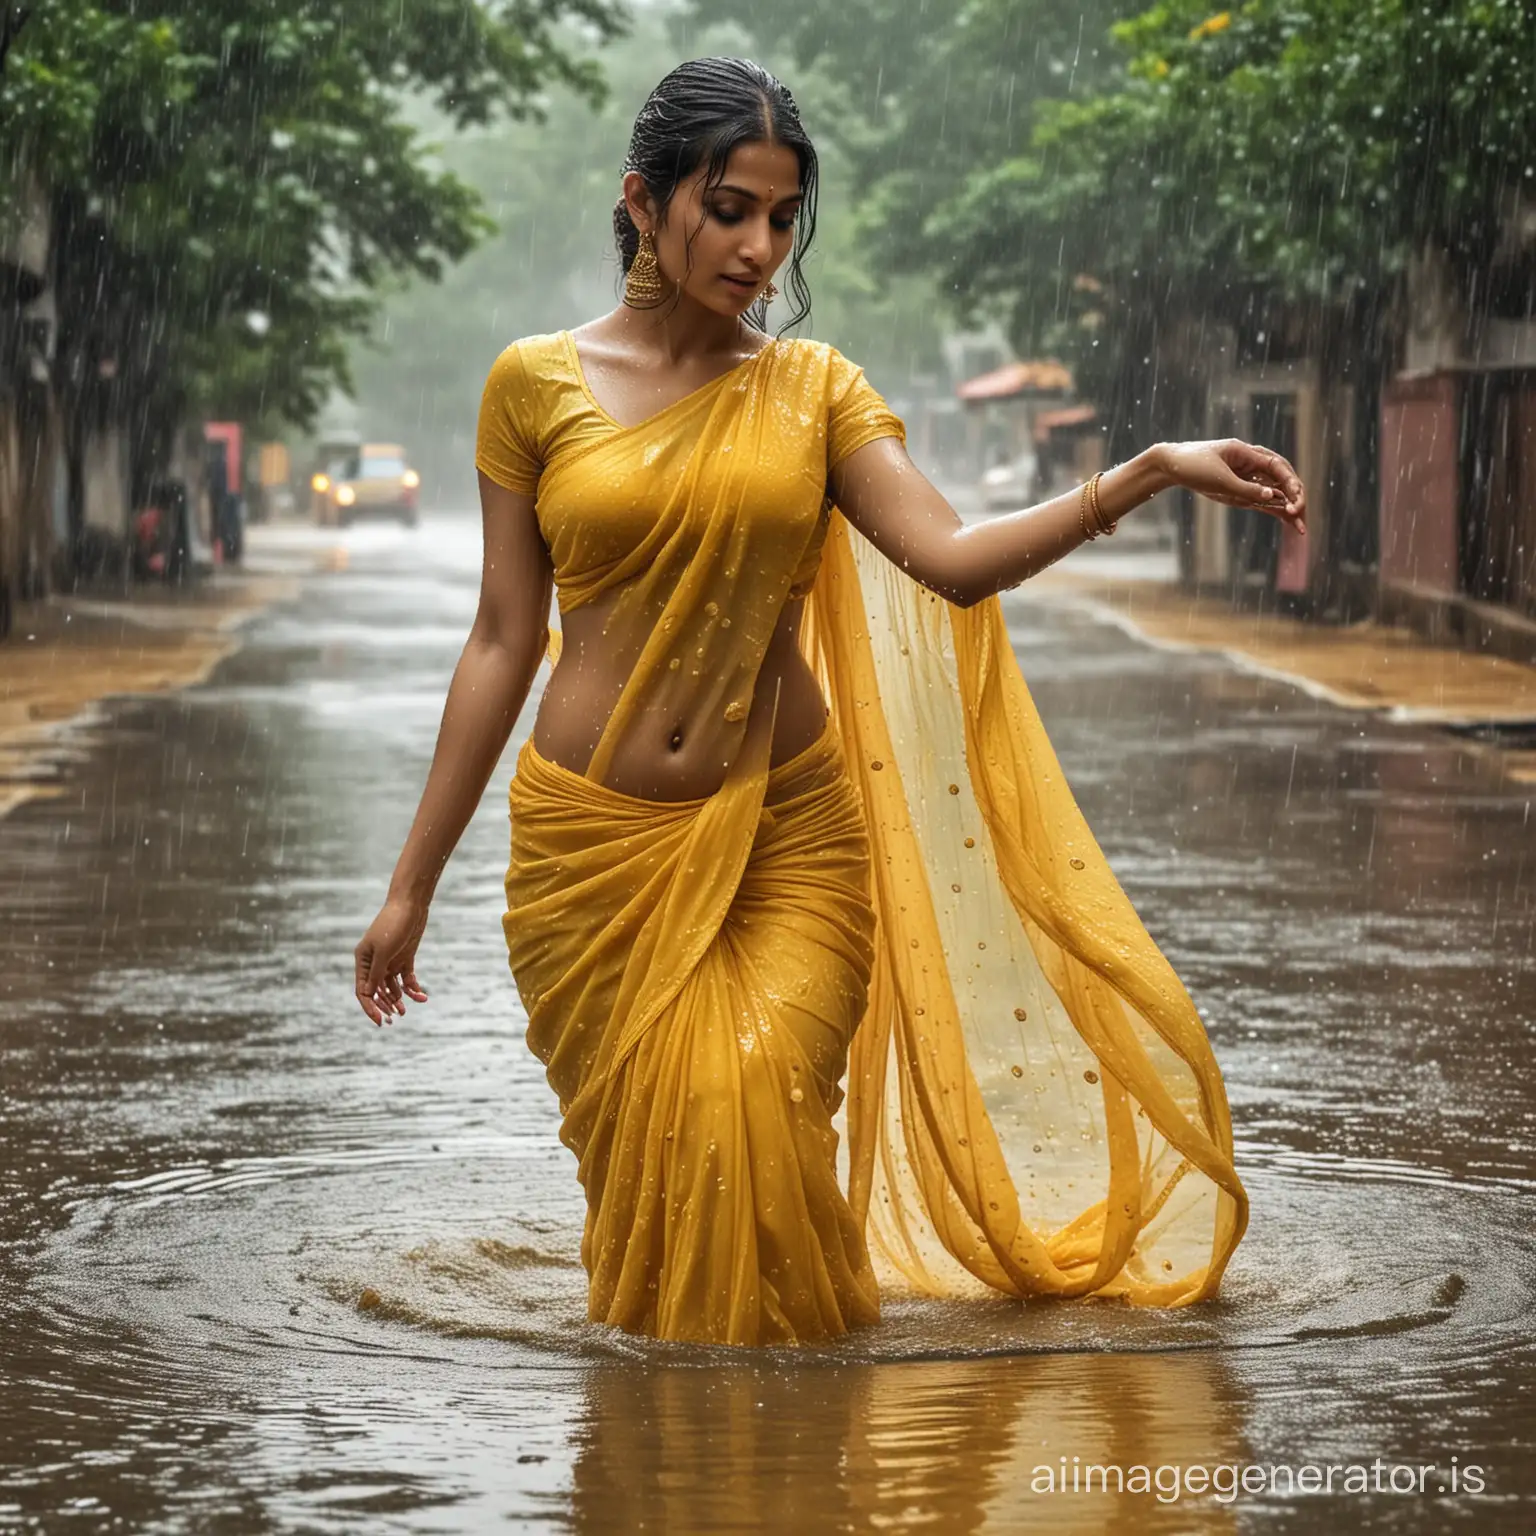 Stunningly beautiful Indian model, hour glass figure, yellow chiffon saree, soaking wet saree, rain, drenched, glamorous, gorgeous face, highly detailed hdr photo